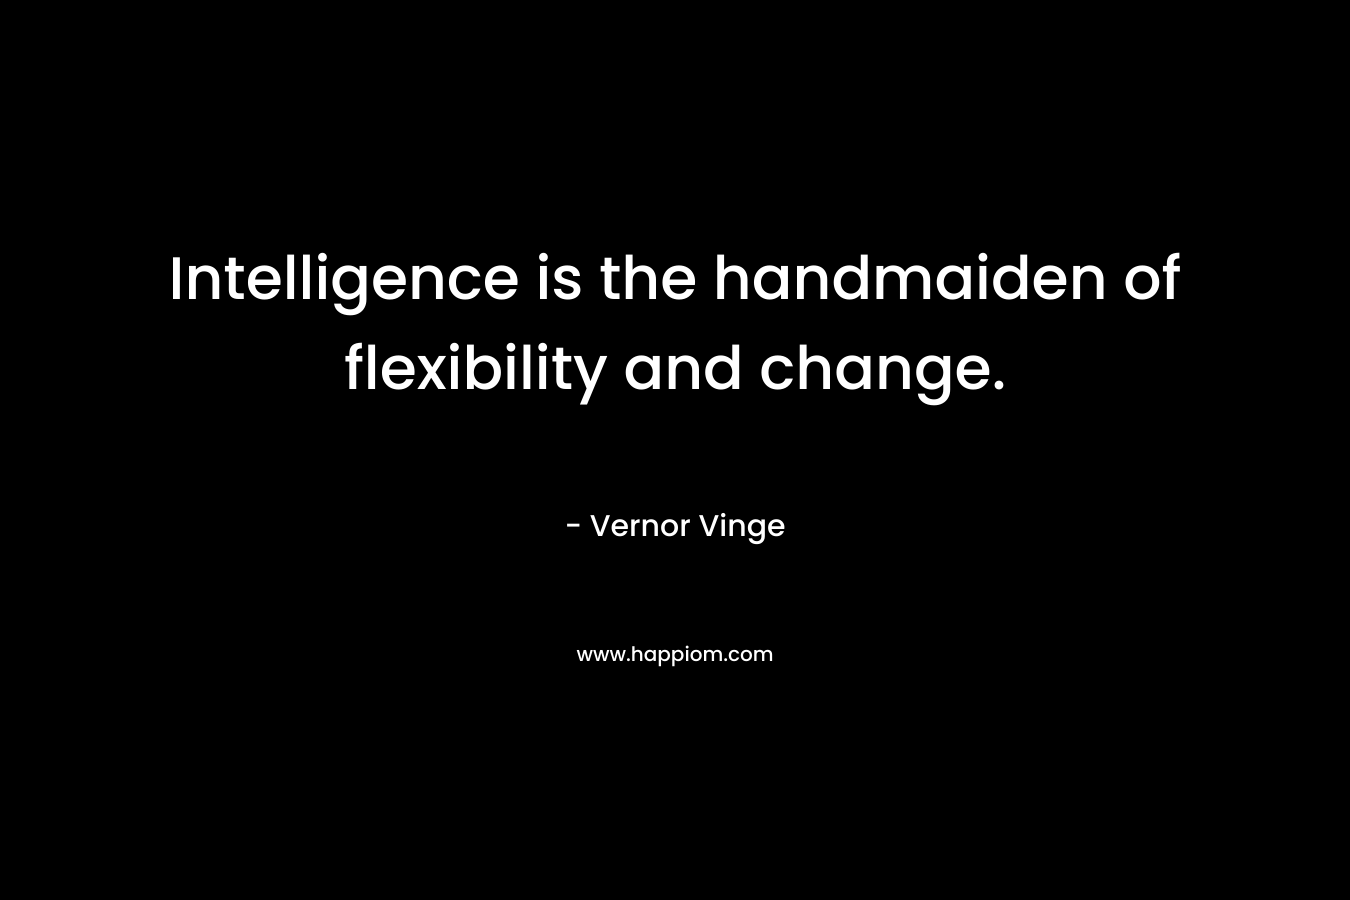 Intelligence is the handmaiden of flexibility and change.